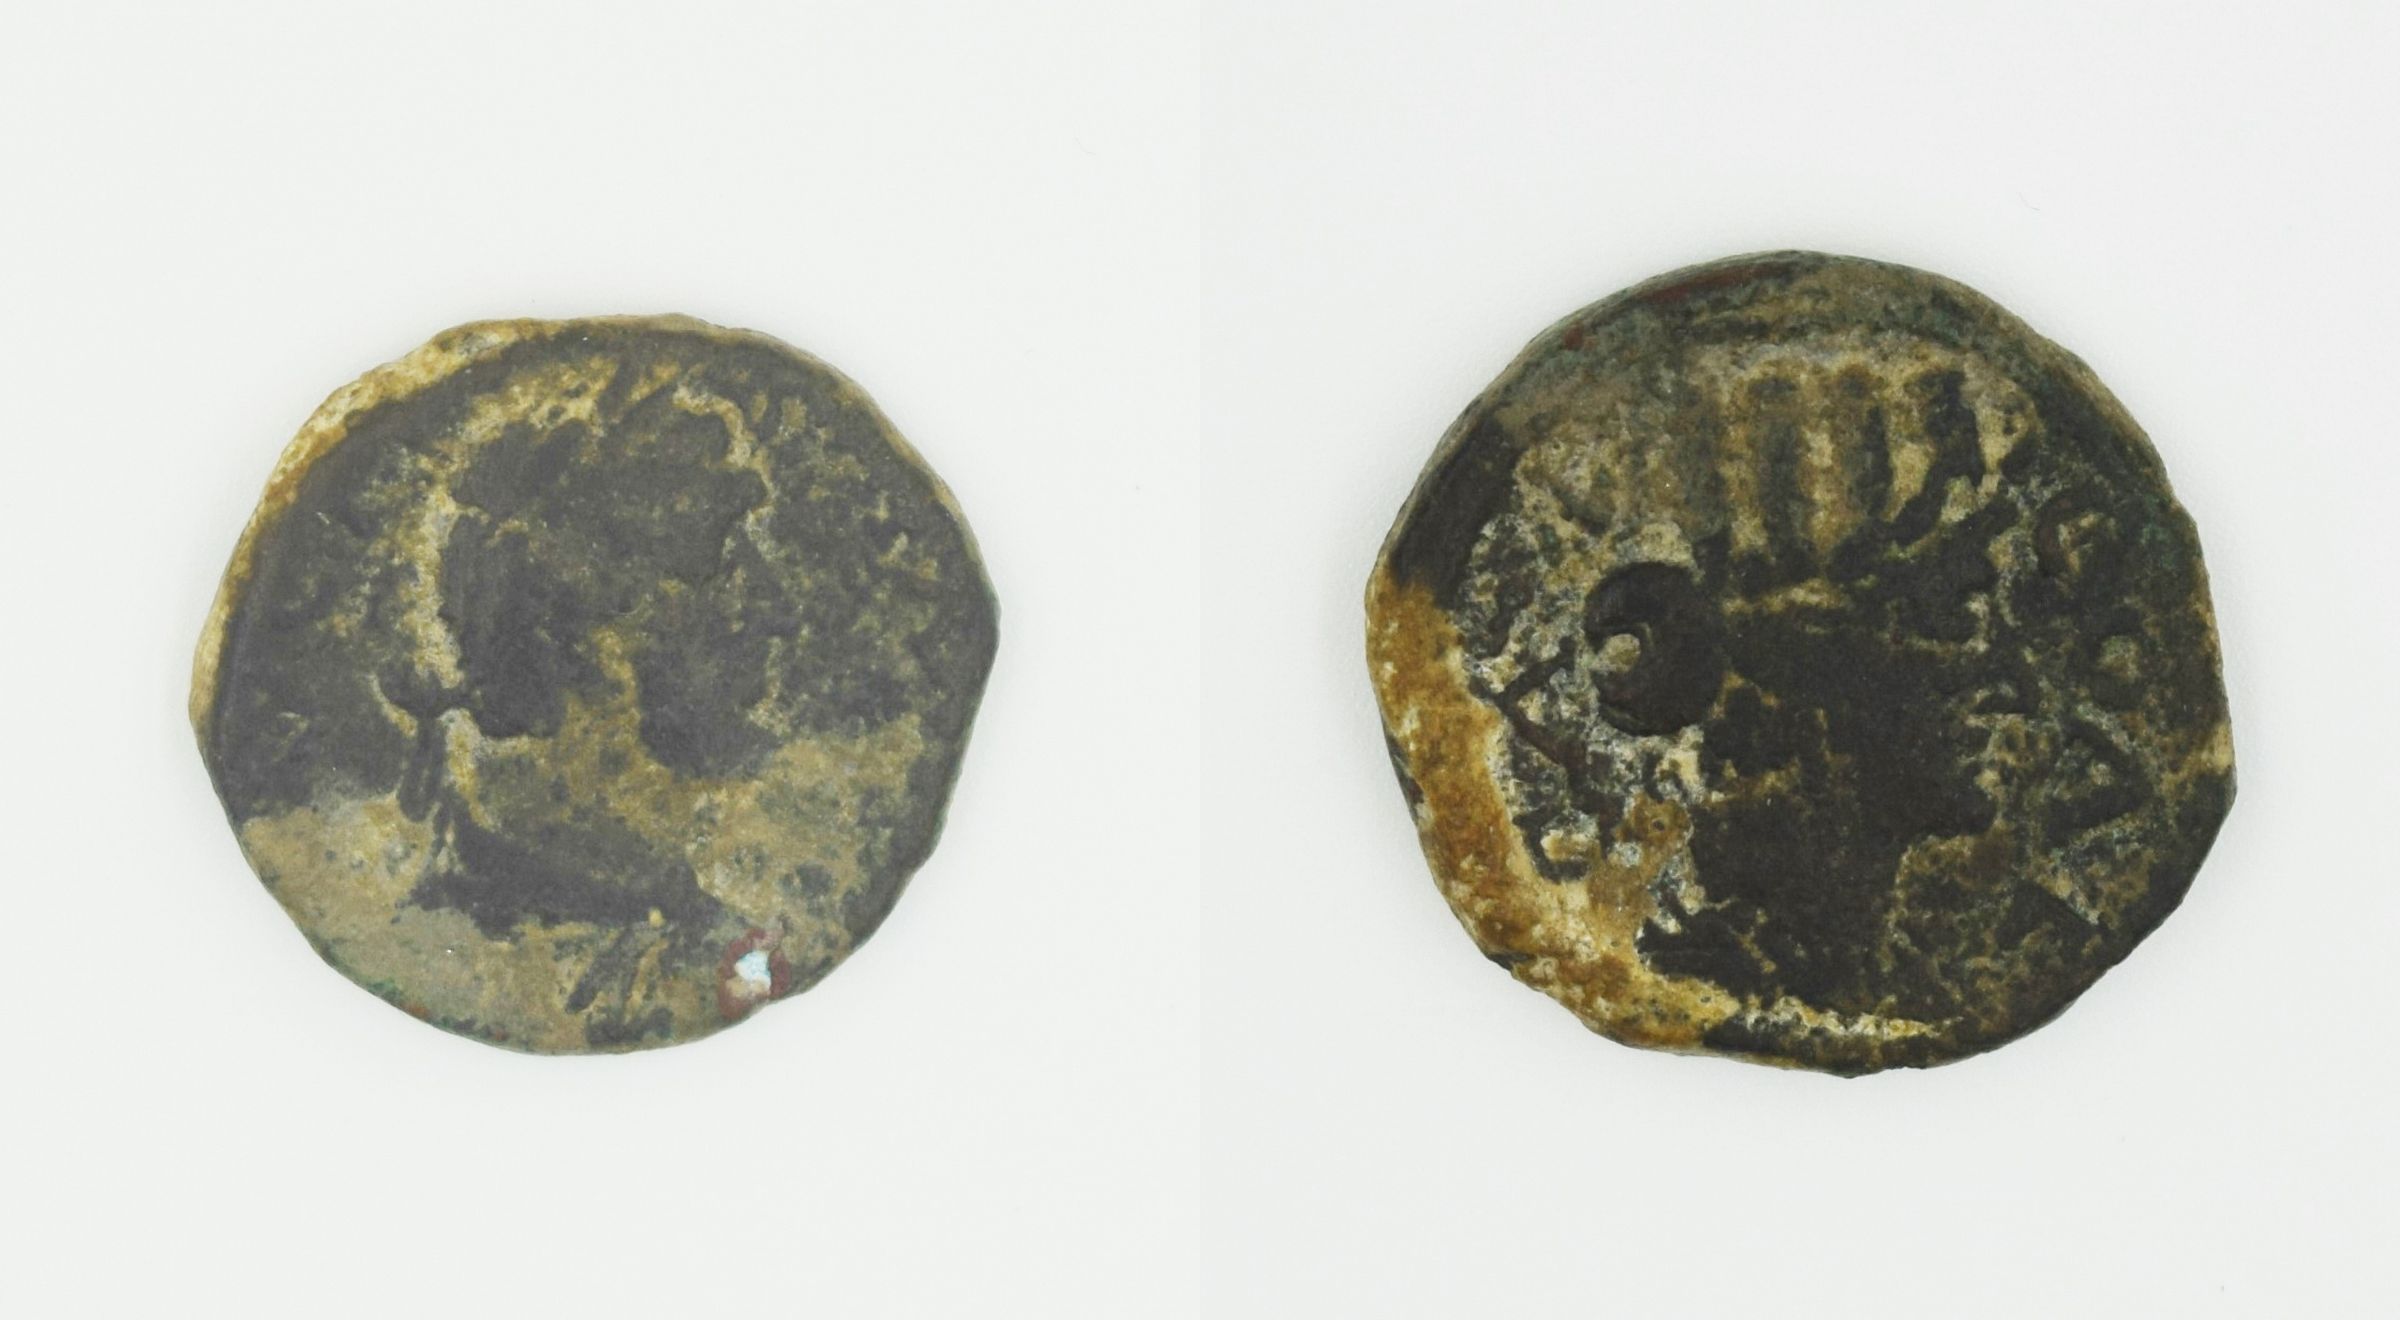 A BRONZE COIN OF ANTONINUS PIUS FROM JERUSALEM